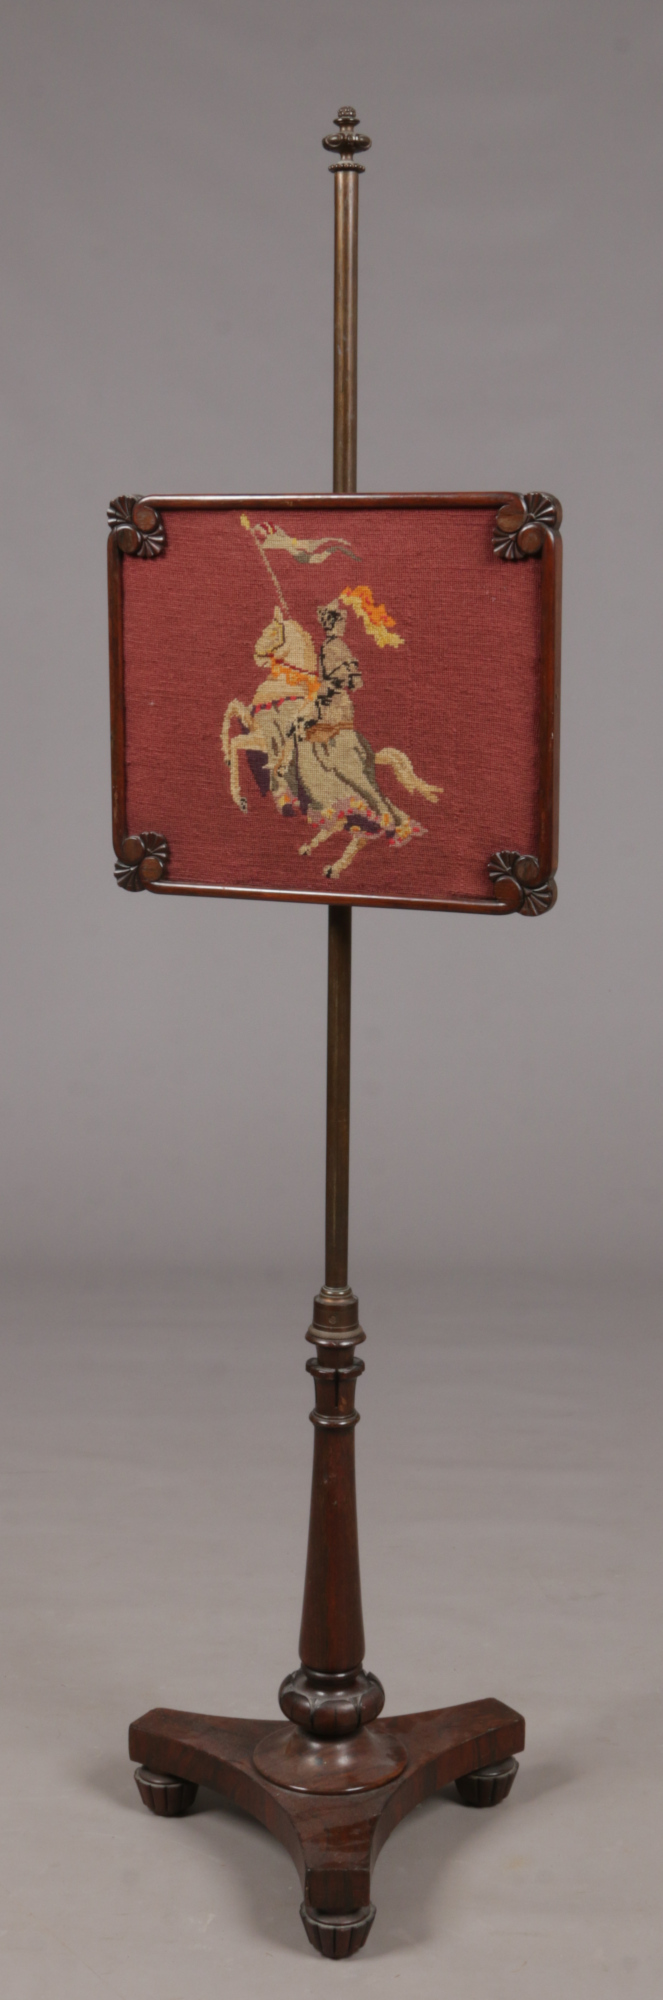 A Regency mahogany pole screen set with a woolwork panel of a knight on horseback.